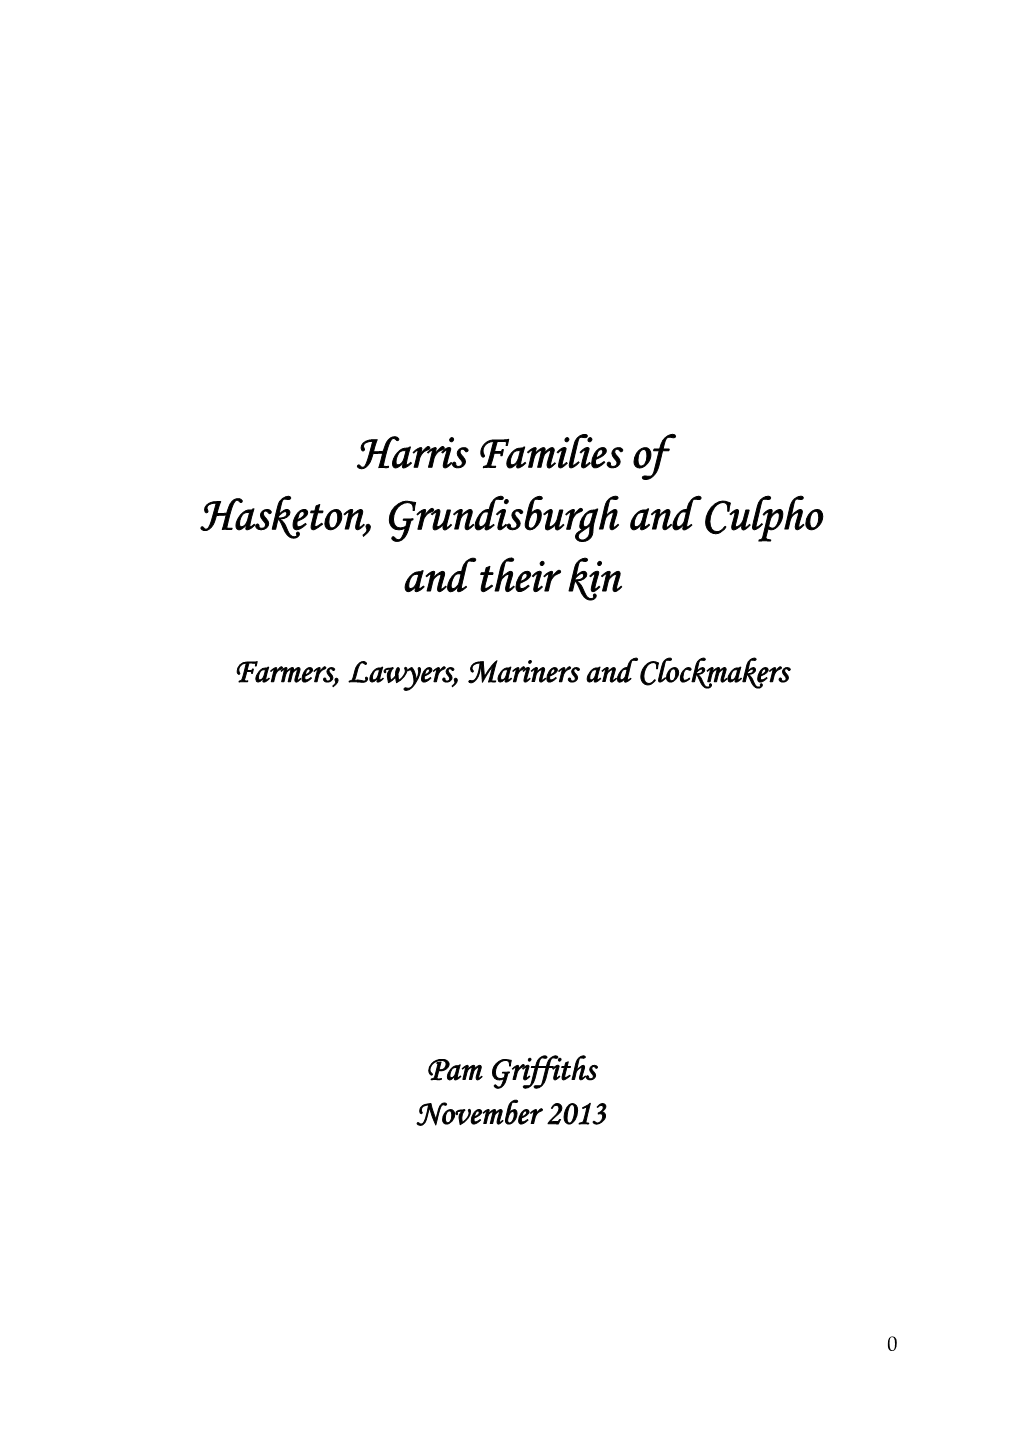 The Harris Families of Hasketon, Grundisburgh and Culpho and Their